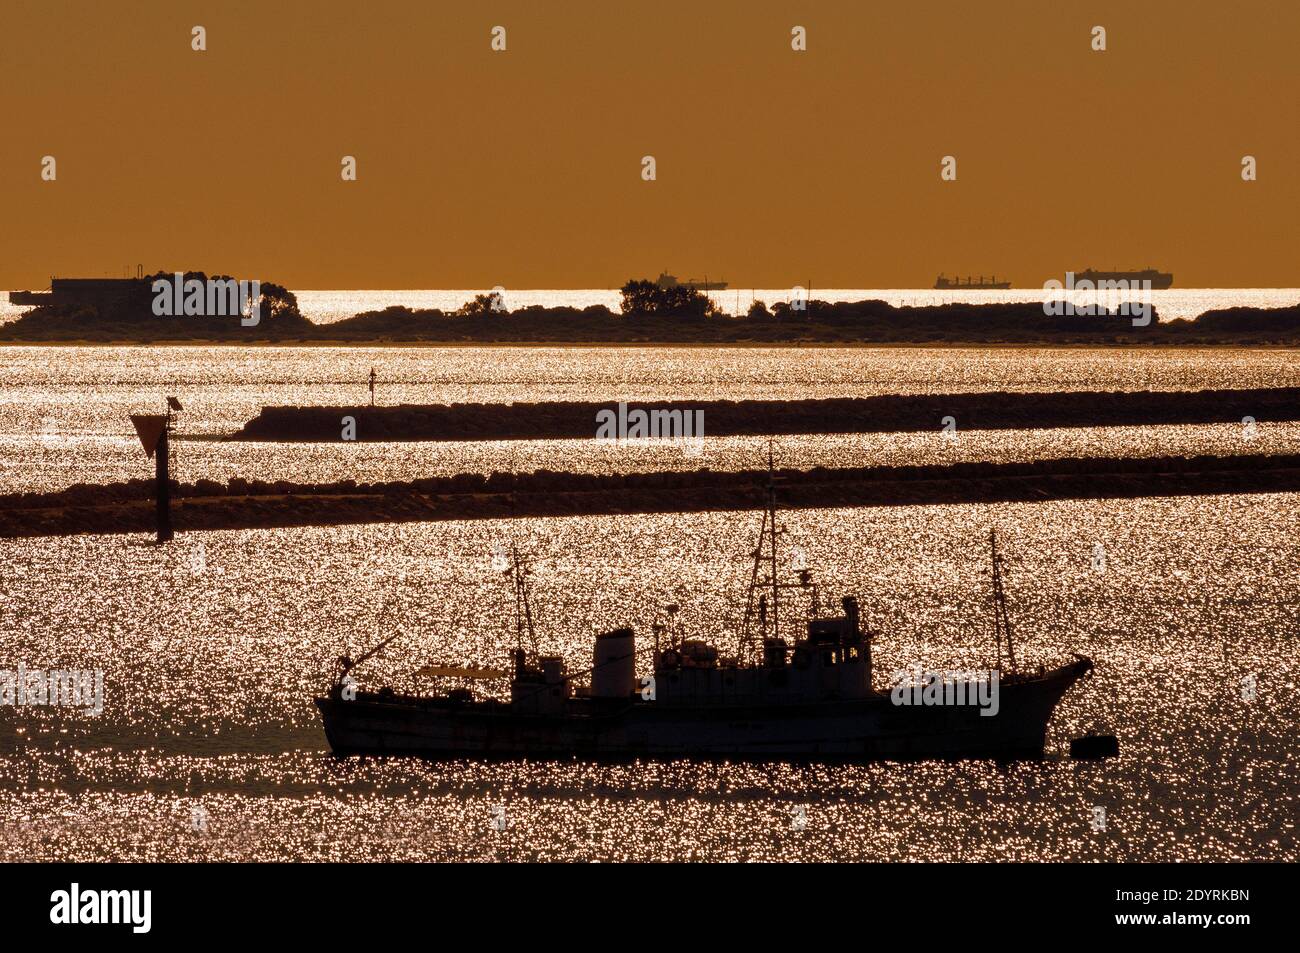 A nautical scene with a low sun reflecting off the oceans surface, silhouetting vessels. Stock Photo